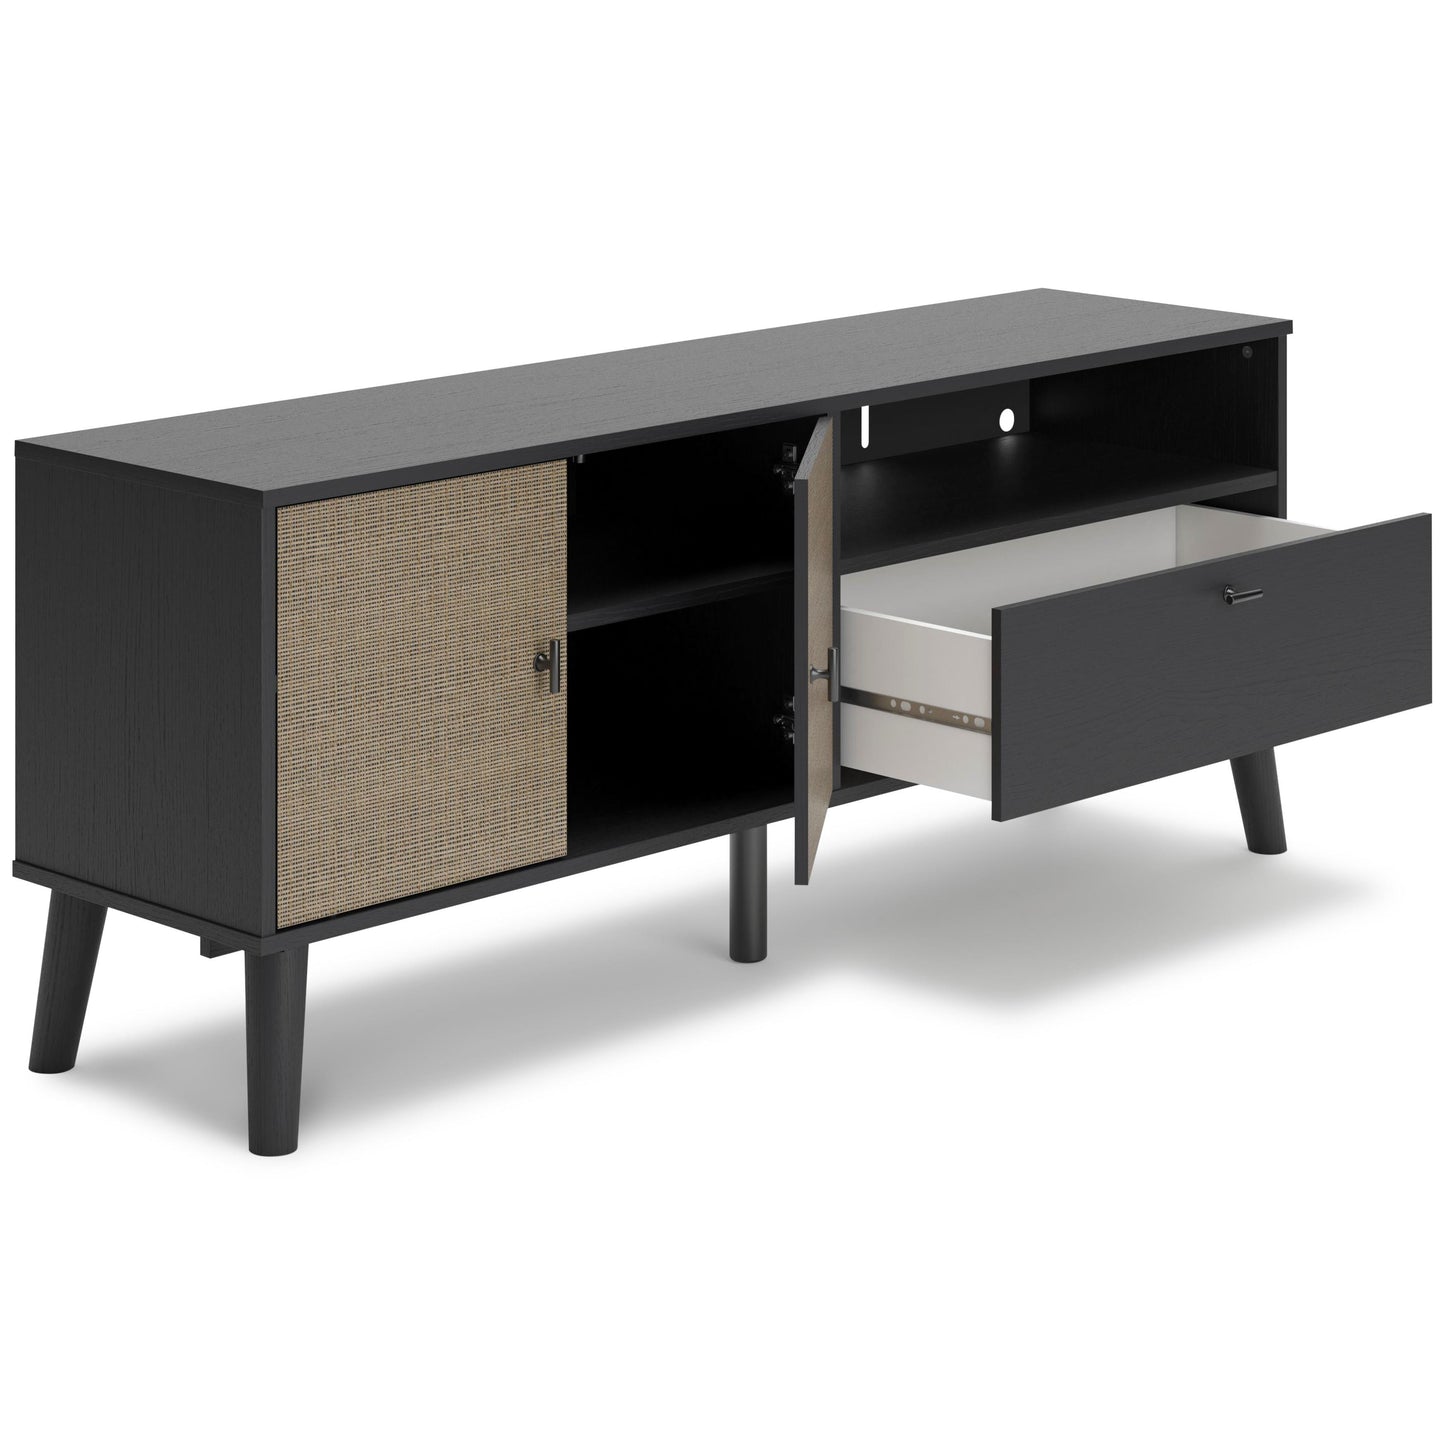 Signature Design by Ashley Charlang TV Stand EW1198-268 IMAGE 2